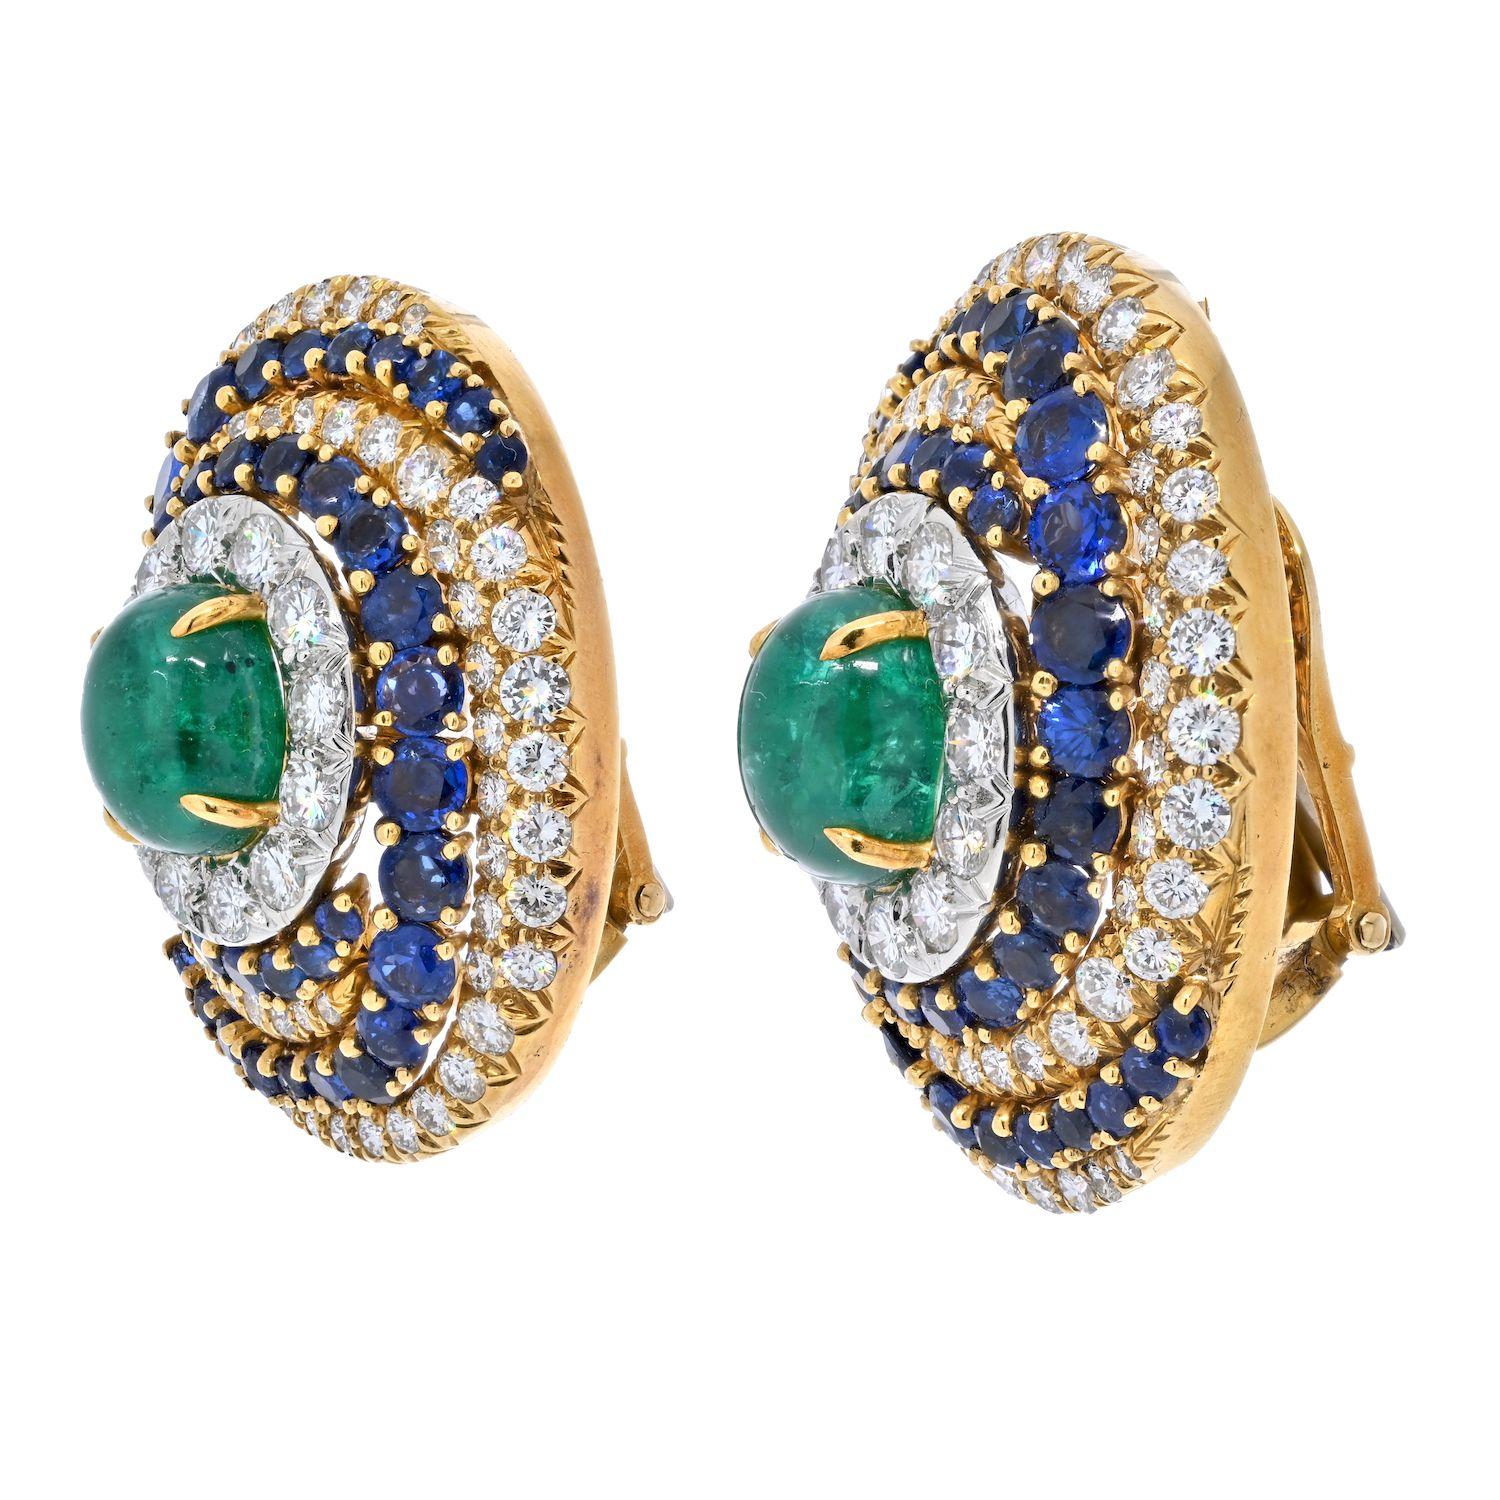 David Webb diamond, emerald and sapphire earrings of a bombe design. These highly decorated bombe earrings feature 10.15cts of green emeralds, 10.39 in sapphires and 7 carats of dimaonds. They fasten by a heavy clip back and stay put on the ear. The